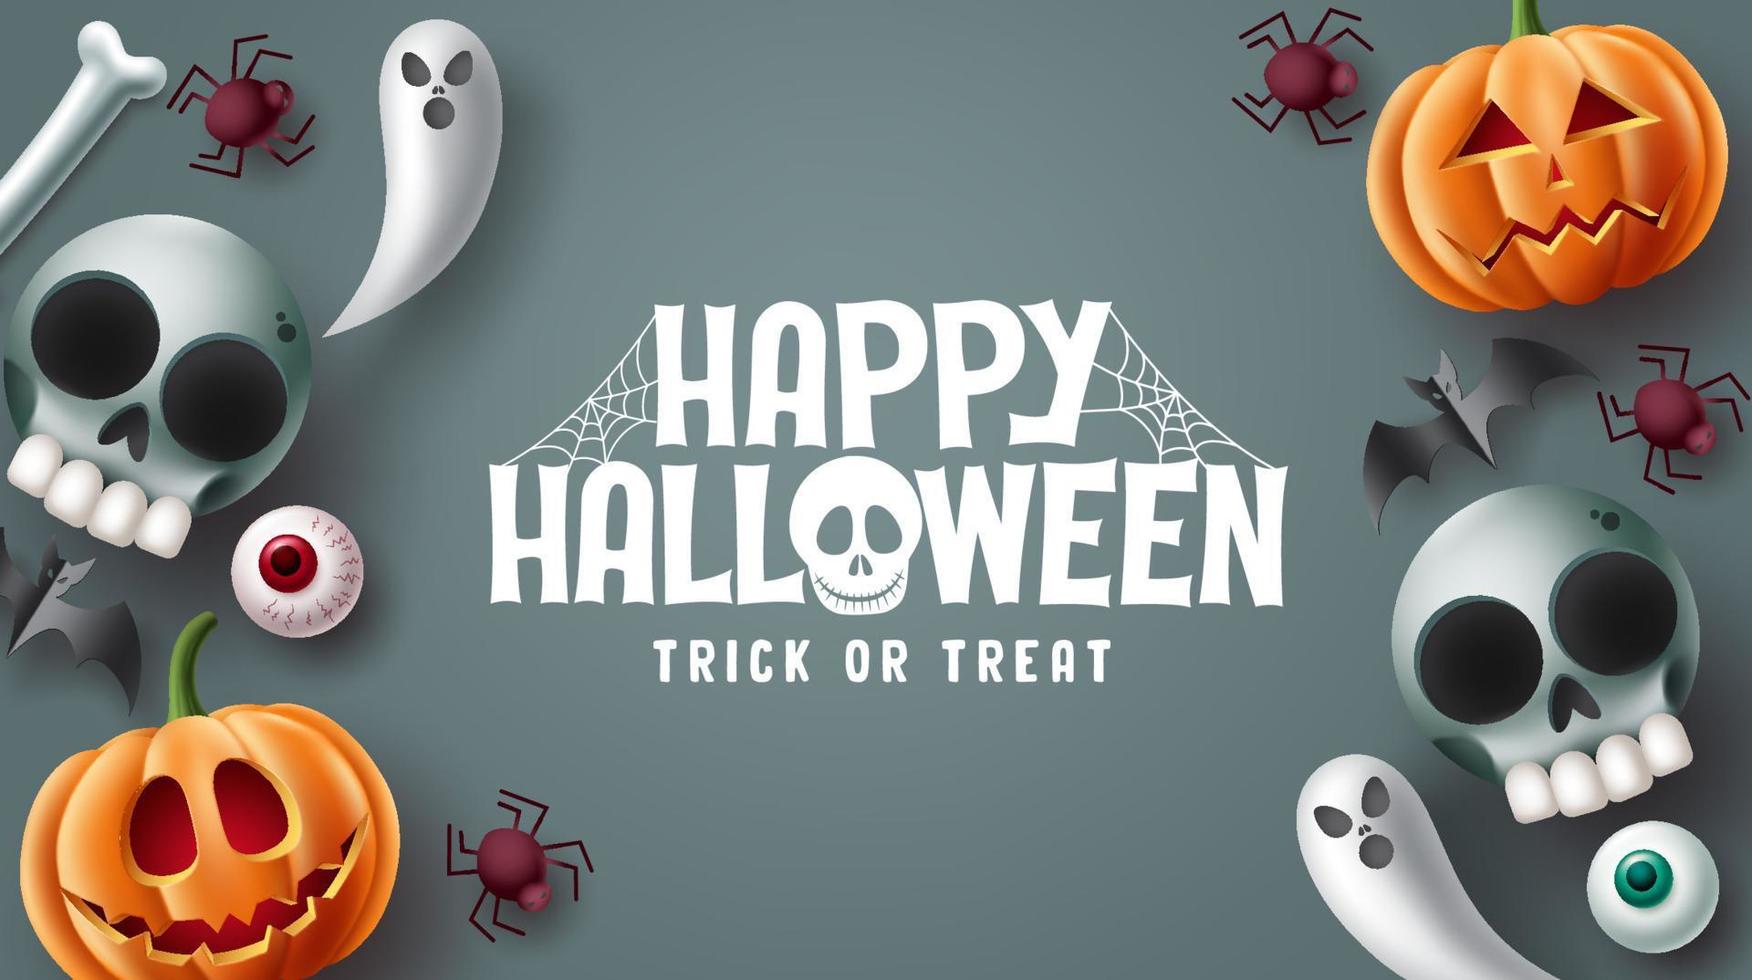 Happy halloween text vector design. Halloween trick or treat in gray space background with scary, spooky, creepy and cute mascot characters. Vector illustration.